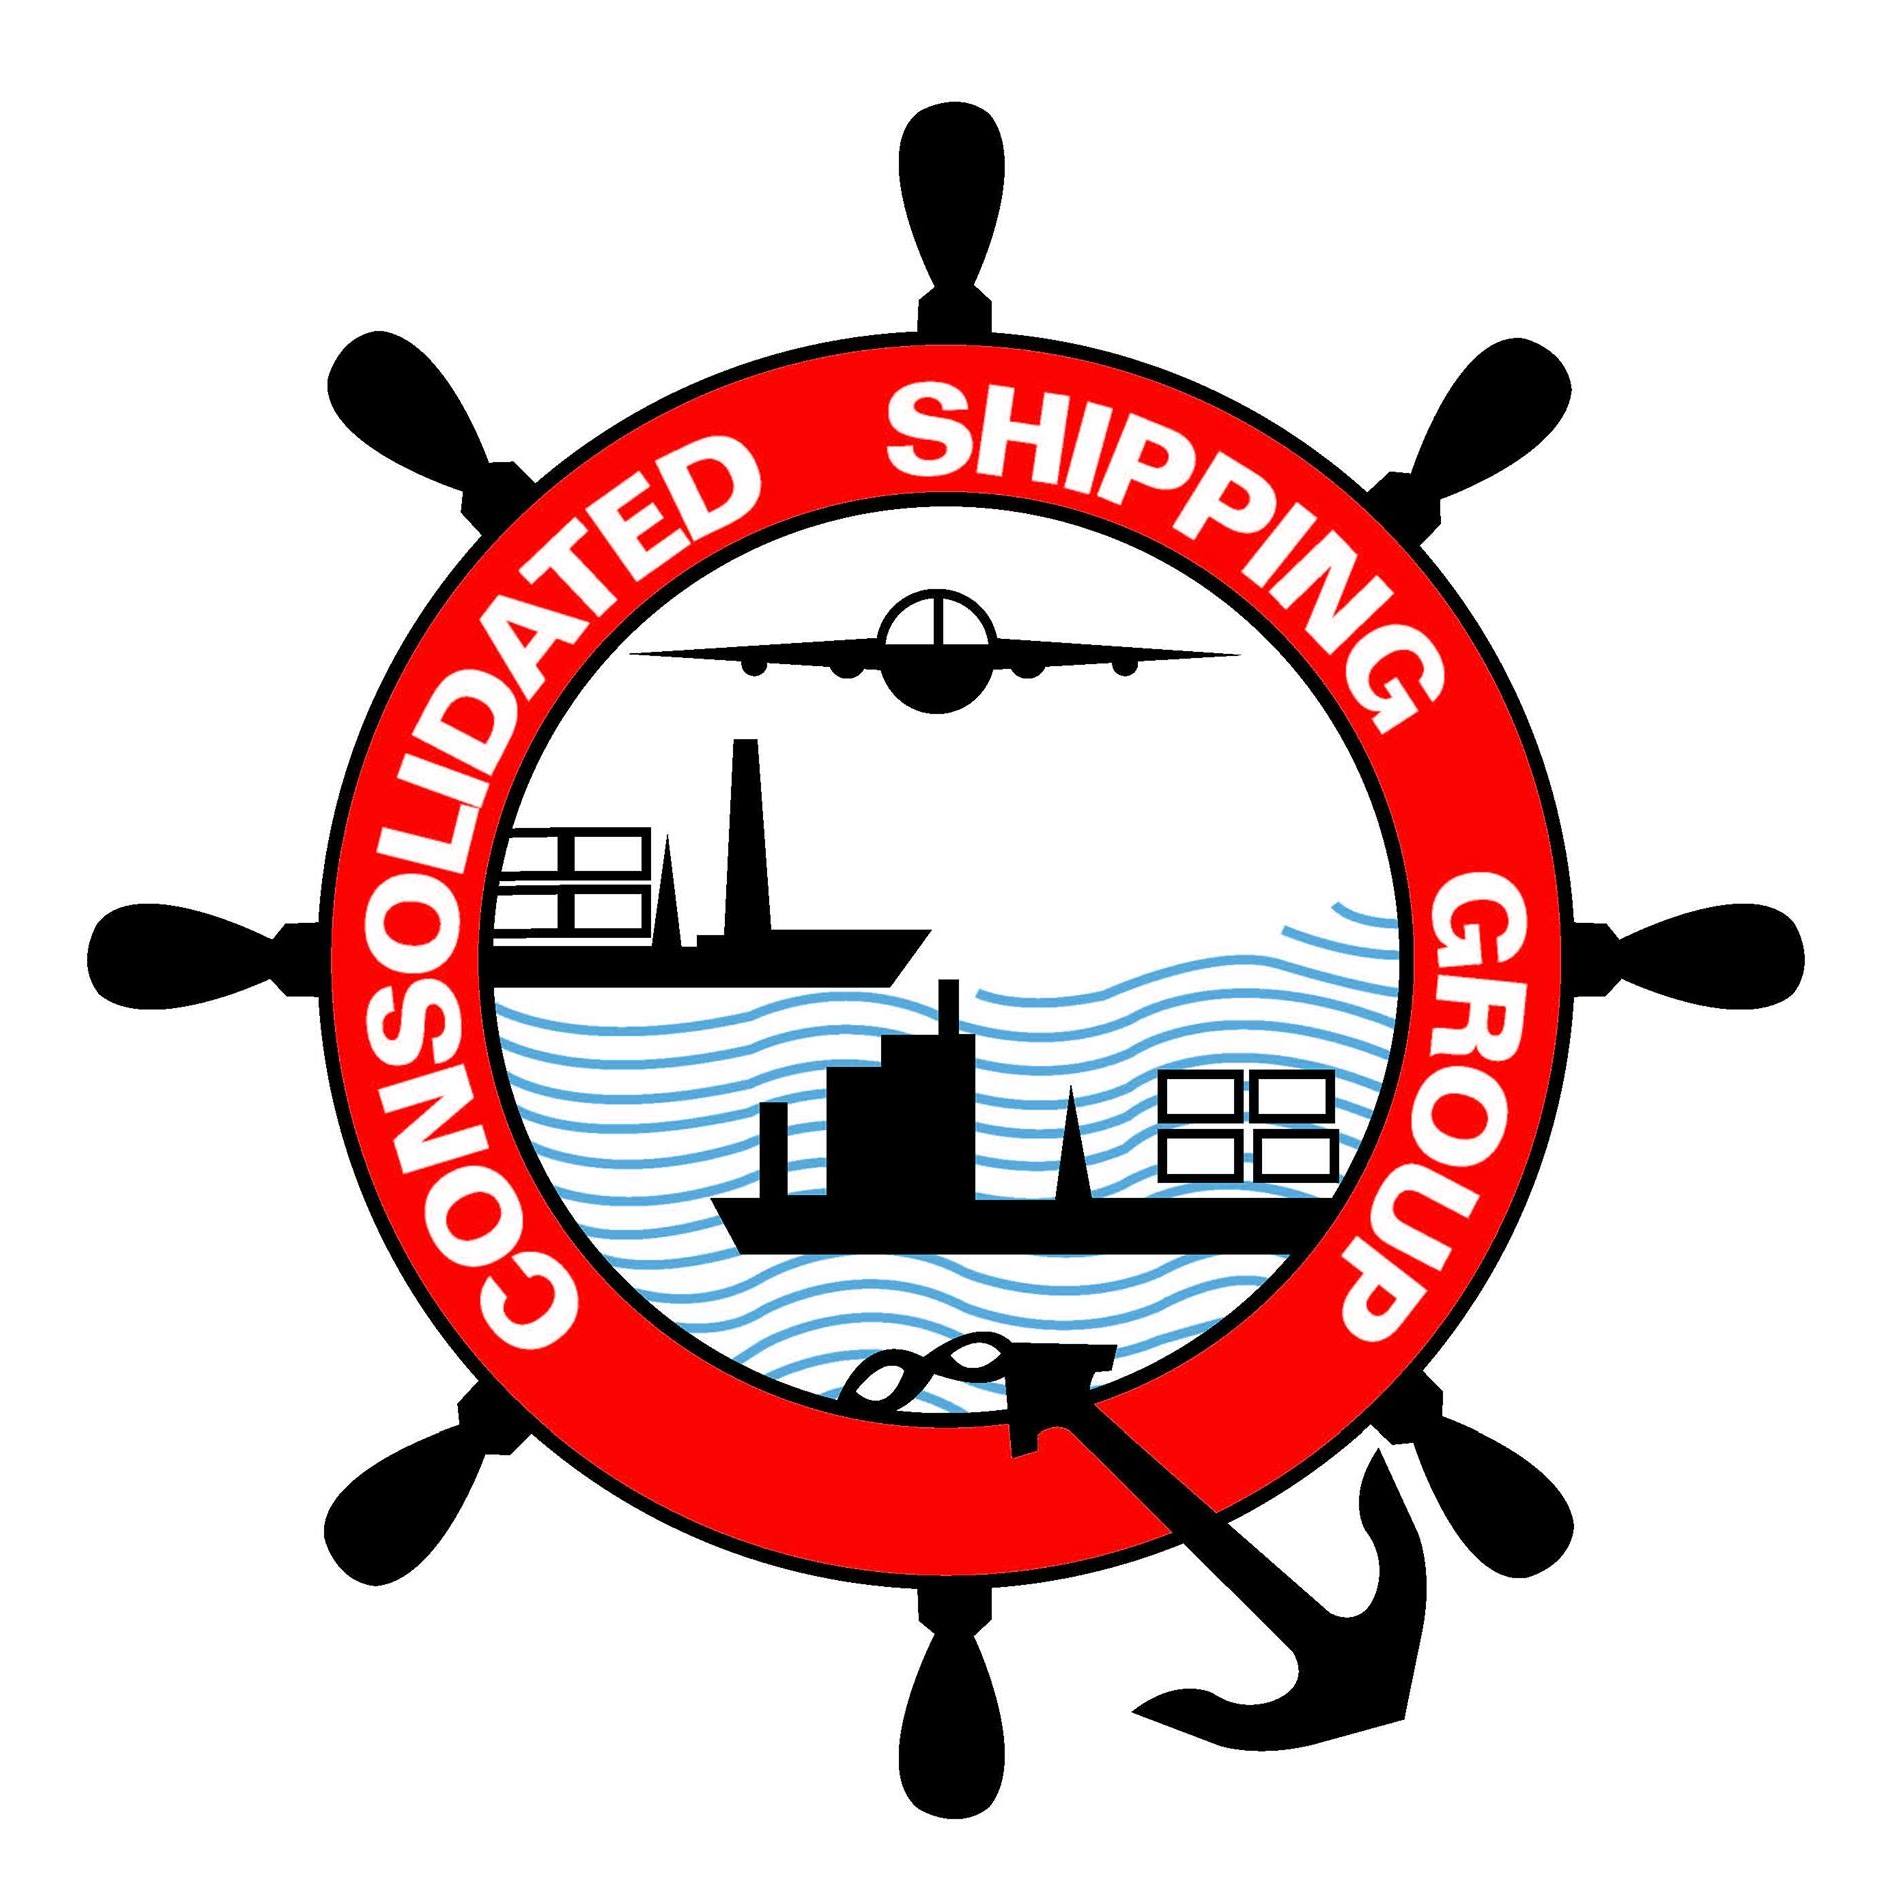 Consolidated Shipping Services LLC